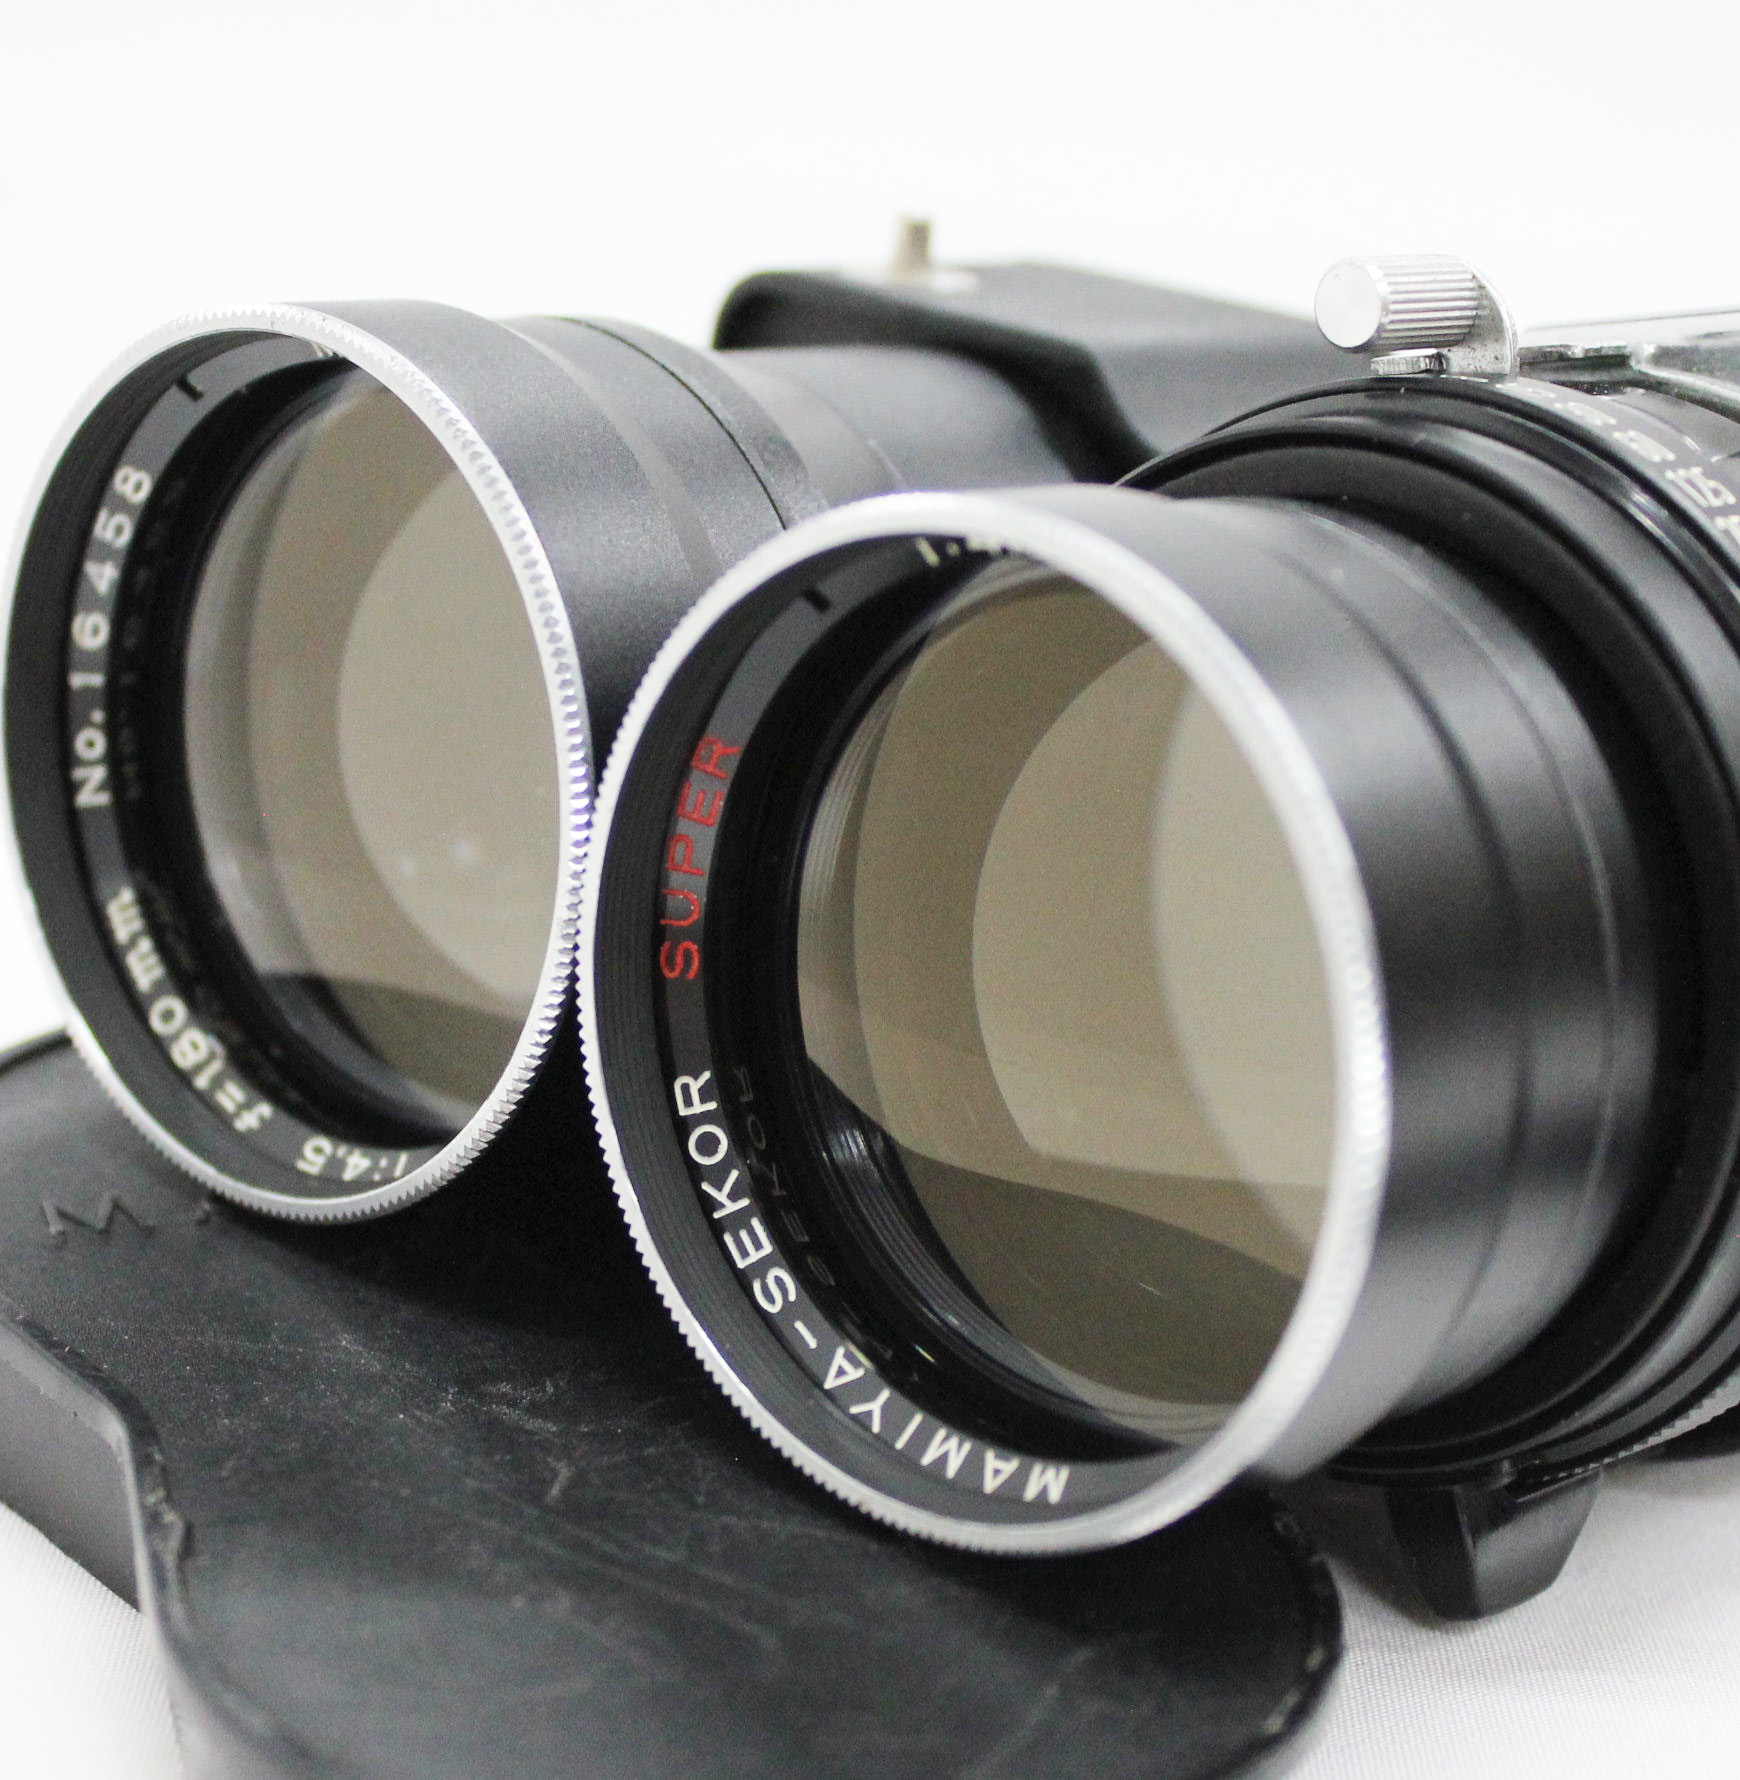 Mamiya Sekor Super 180mm F/4.5 TLR Lens for C3 C33 C220 C330 from 